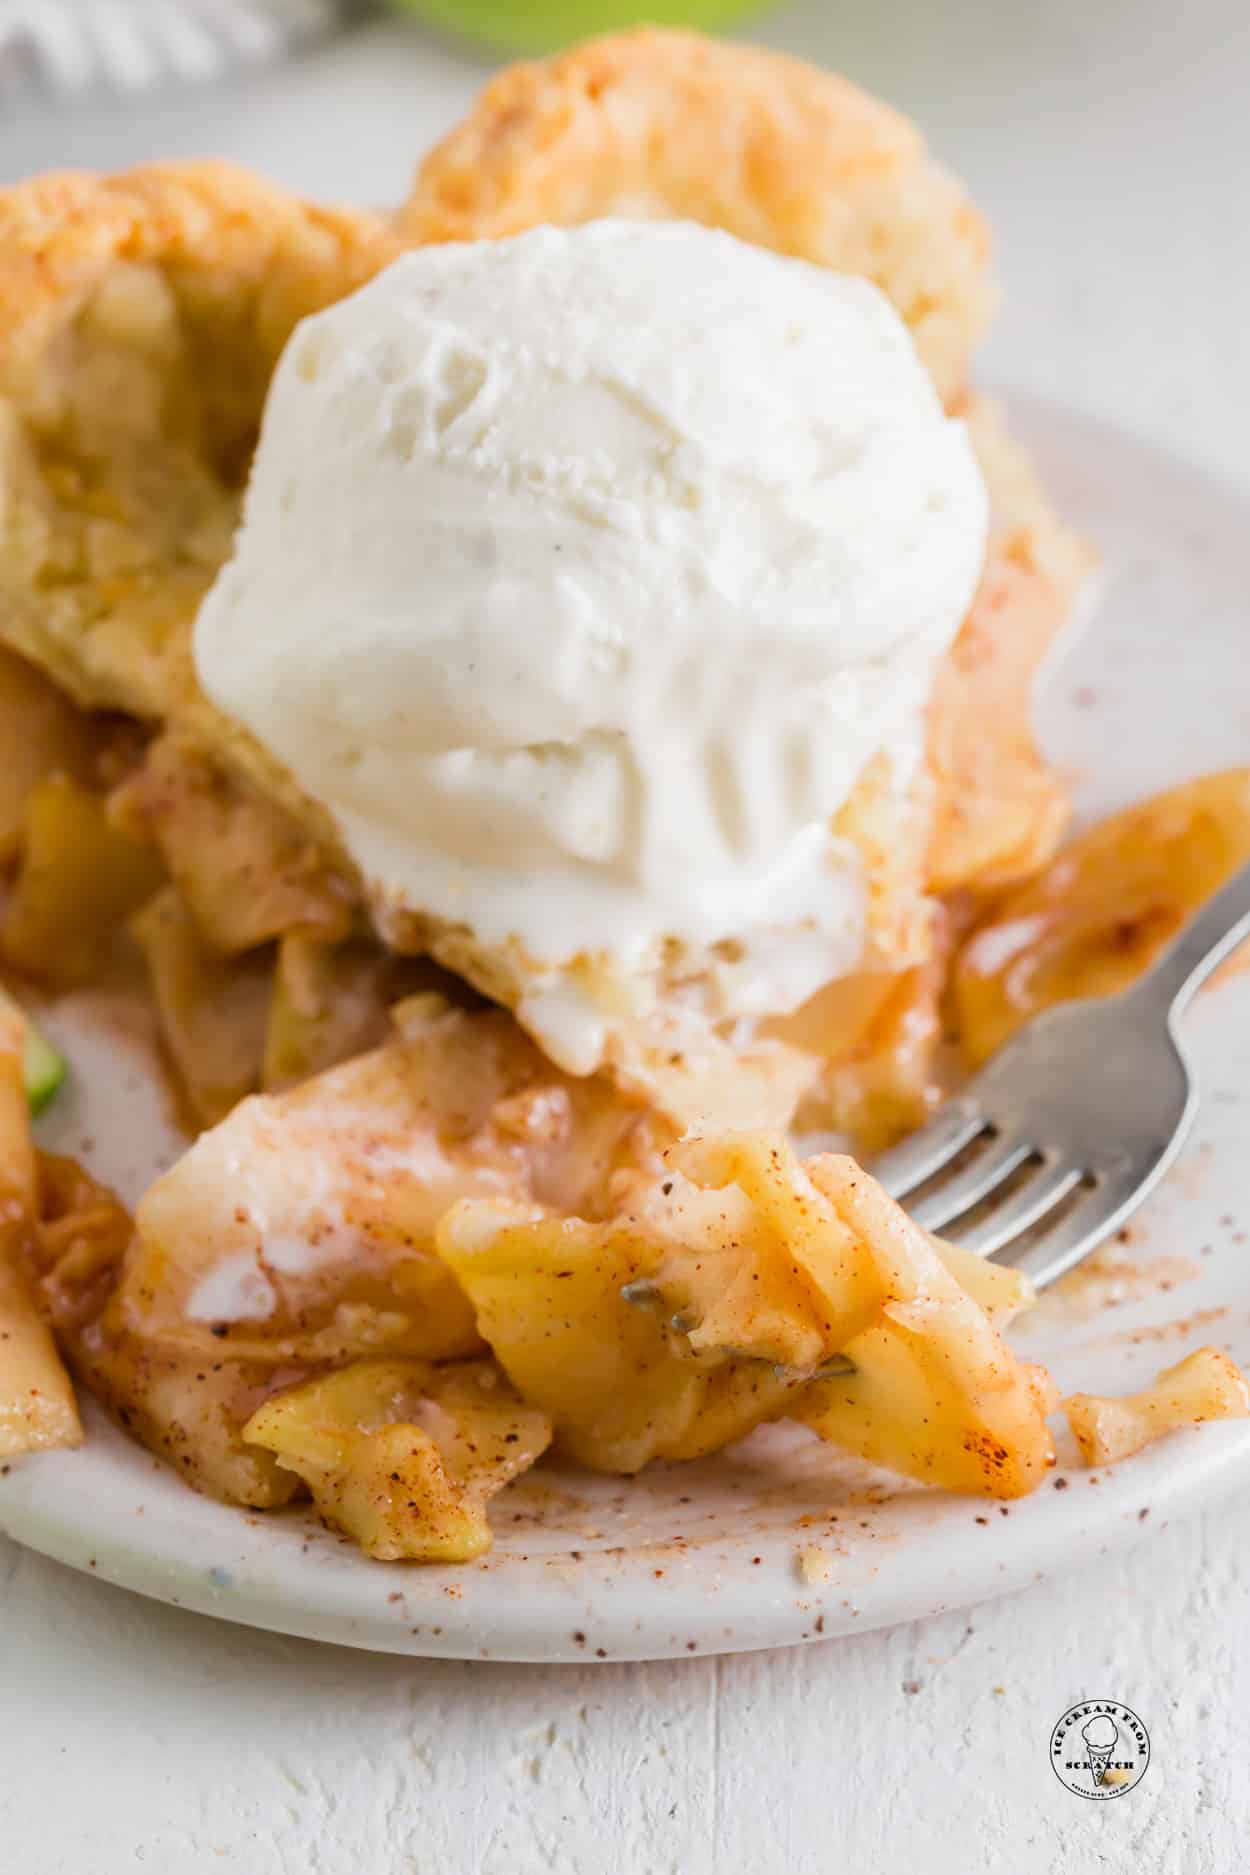 a slice of apple pie with cinnamon, topped with a scoop of vanilla ice cream.